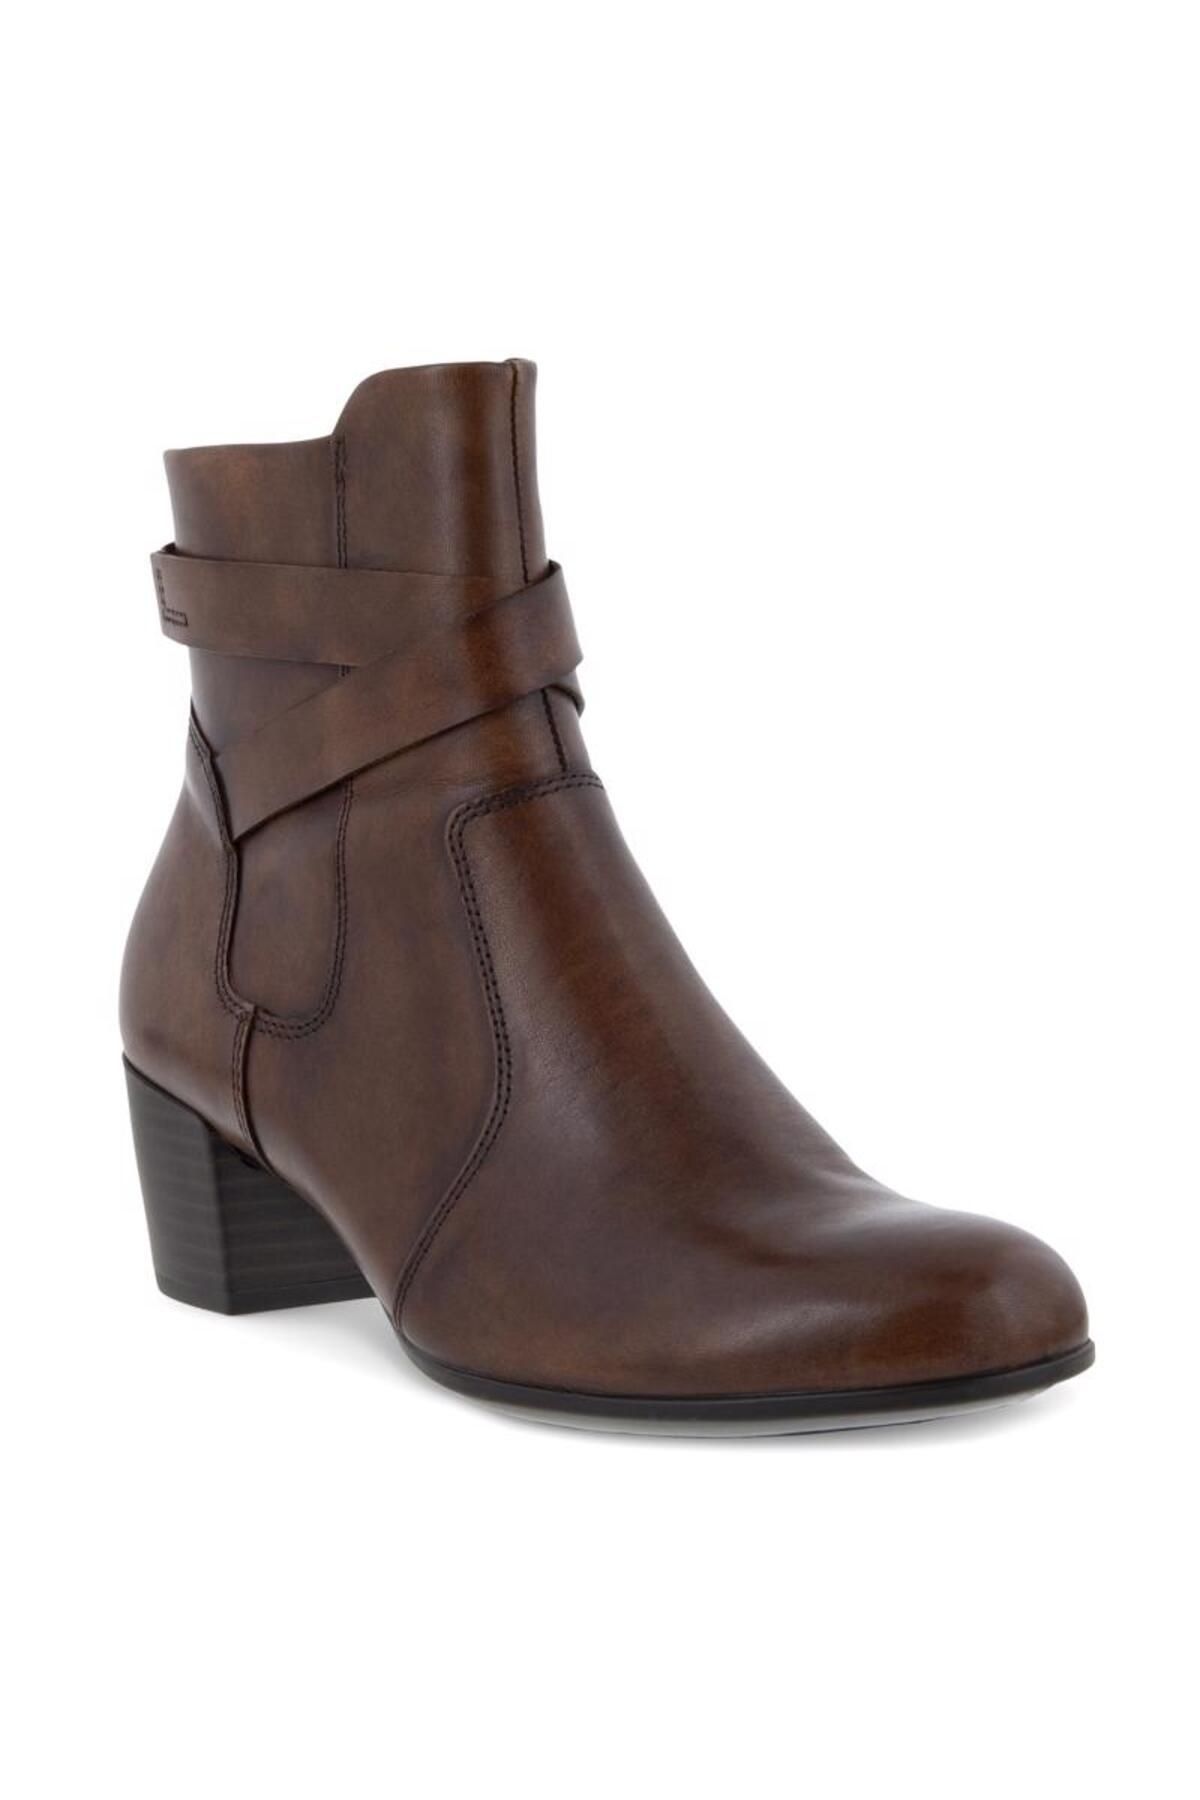 Ecco Shape M 35 Ankle Boot